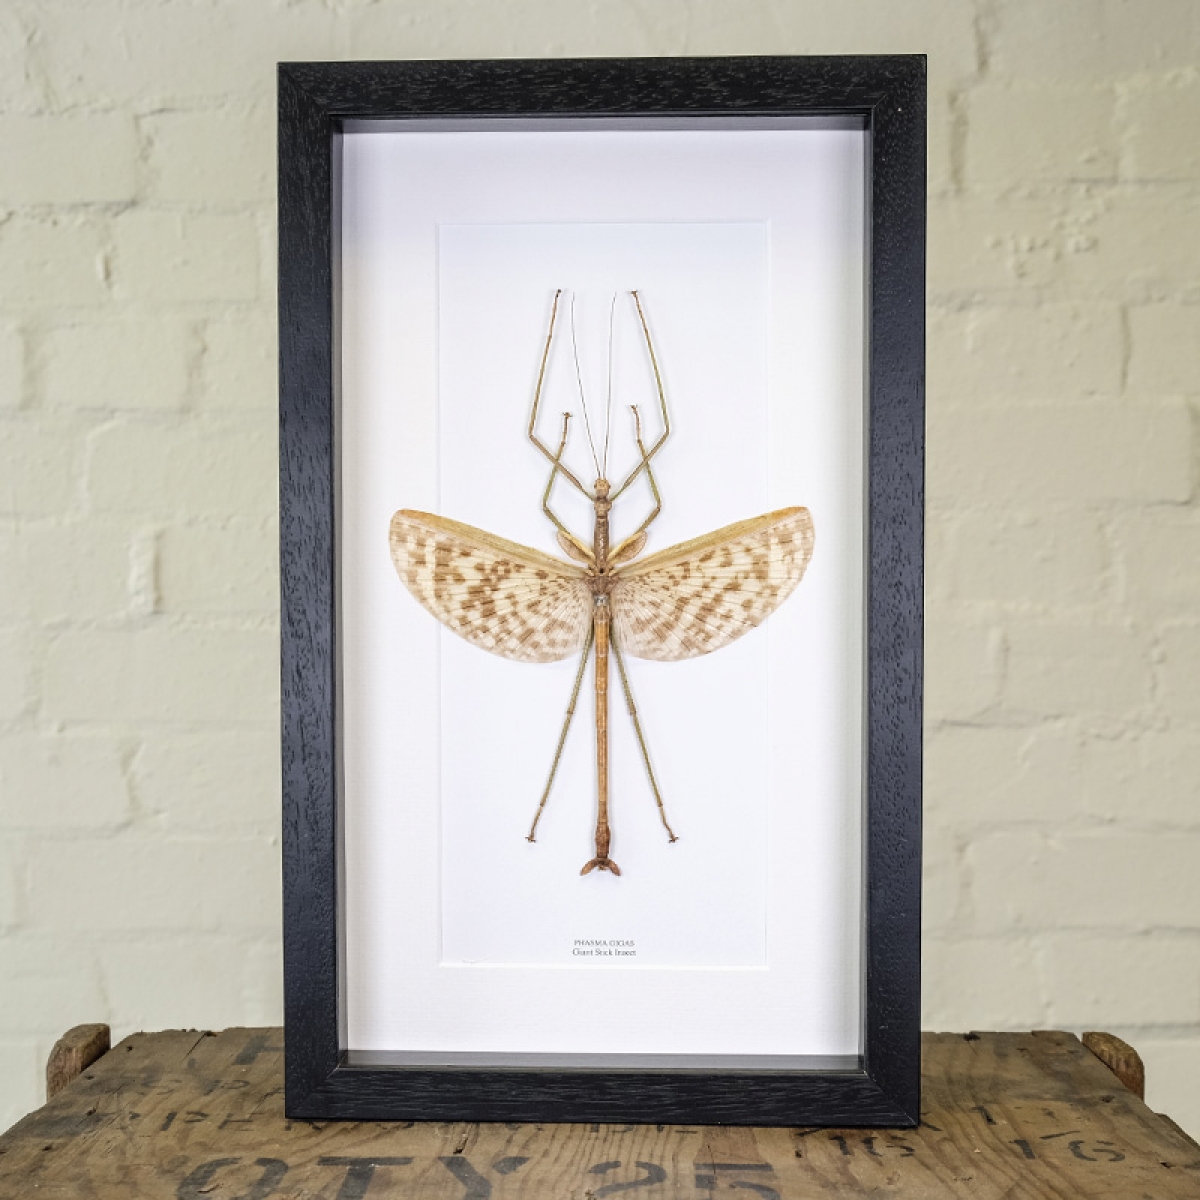 Minibeast Giant Stick Insect in Box Frame (Phasma gigas)